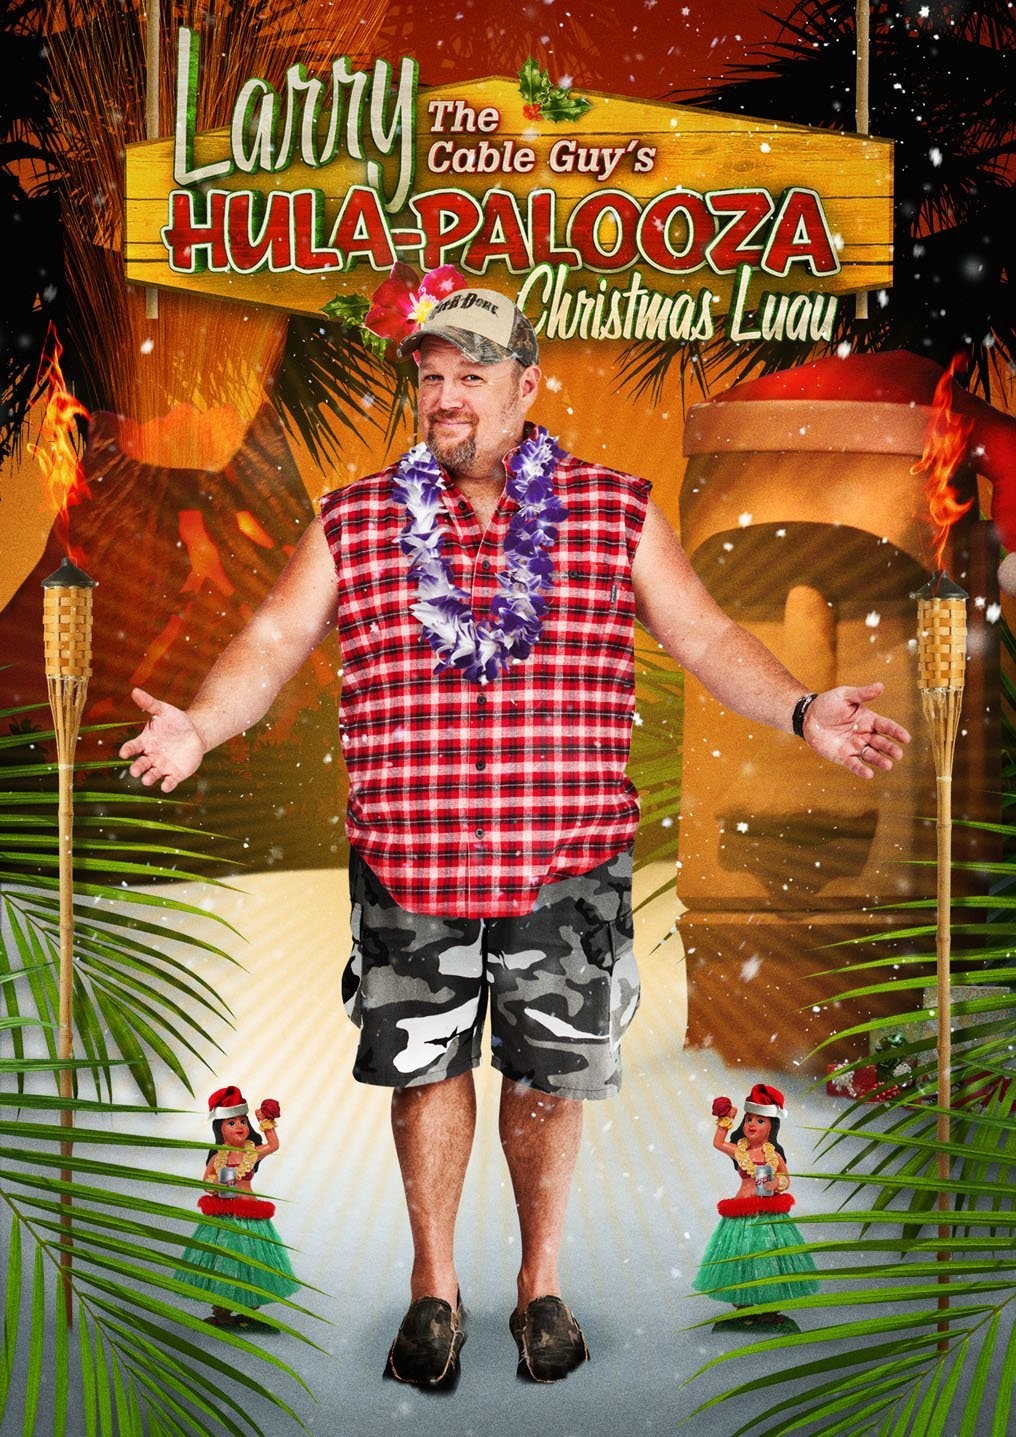 Larry The Cable Guy – DVD “Larry The Cable Guy’s Hula-Palooza Christmas Luau”